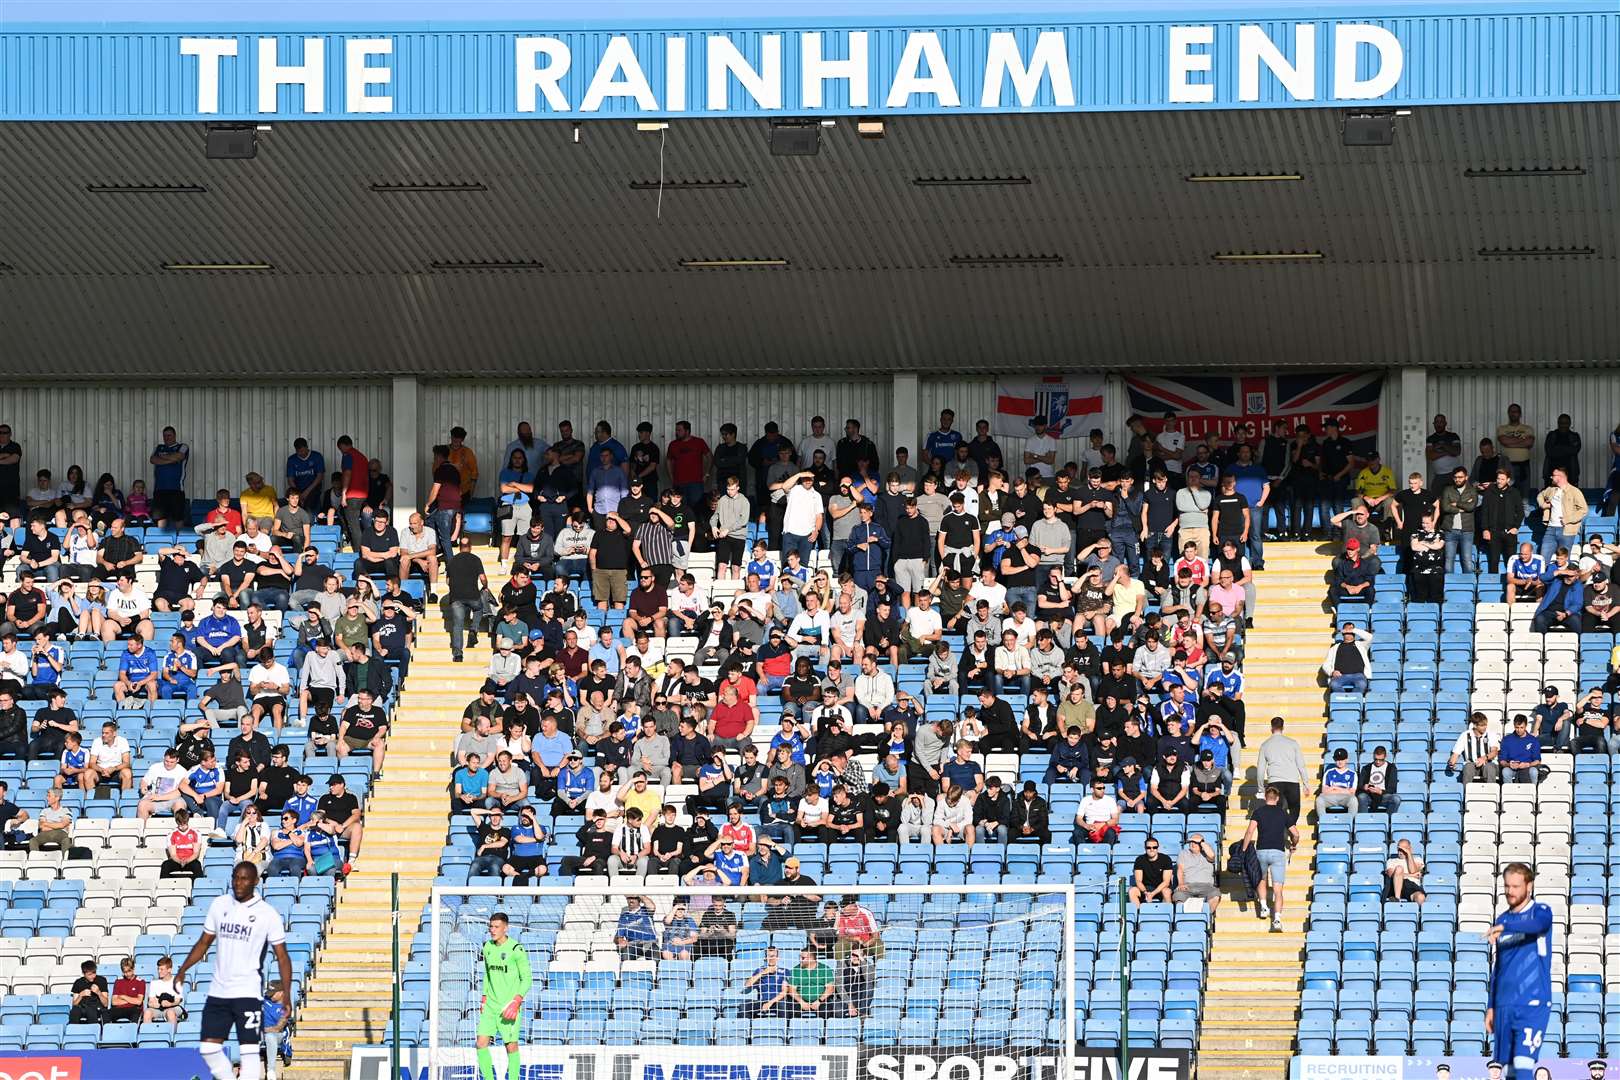 Gillingham fans in The Rainham End as they returned to Priestfield after more than 500 days away. Picture: Barry Goodwin (49649983)